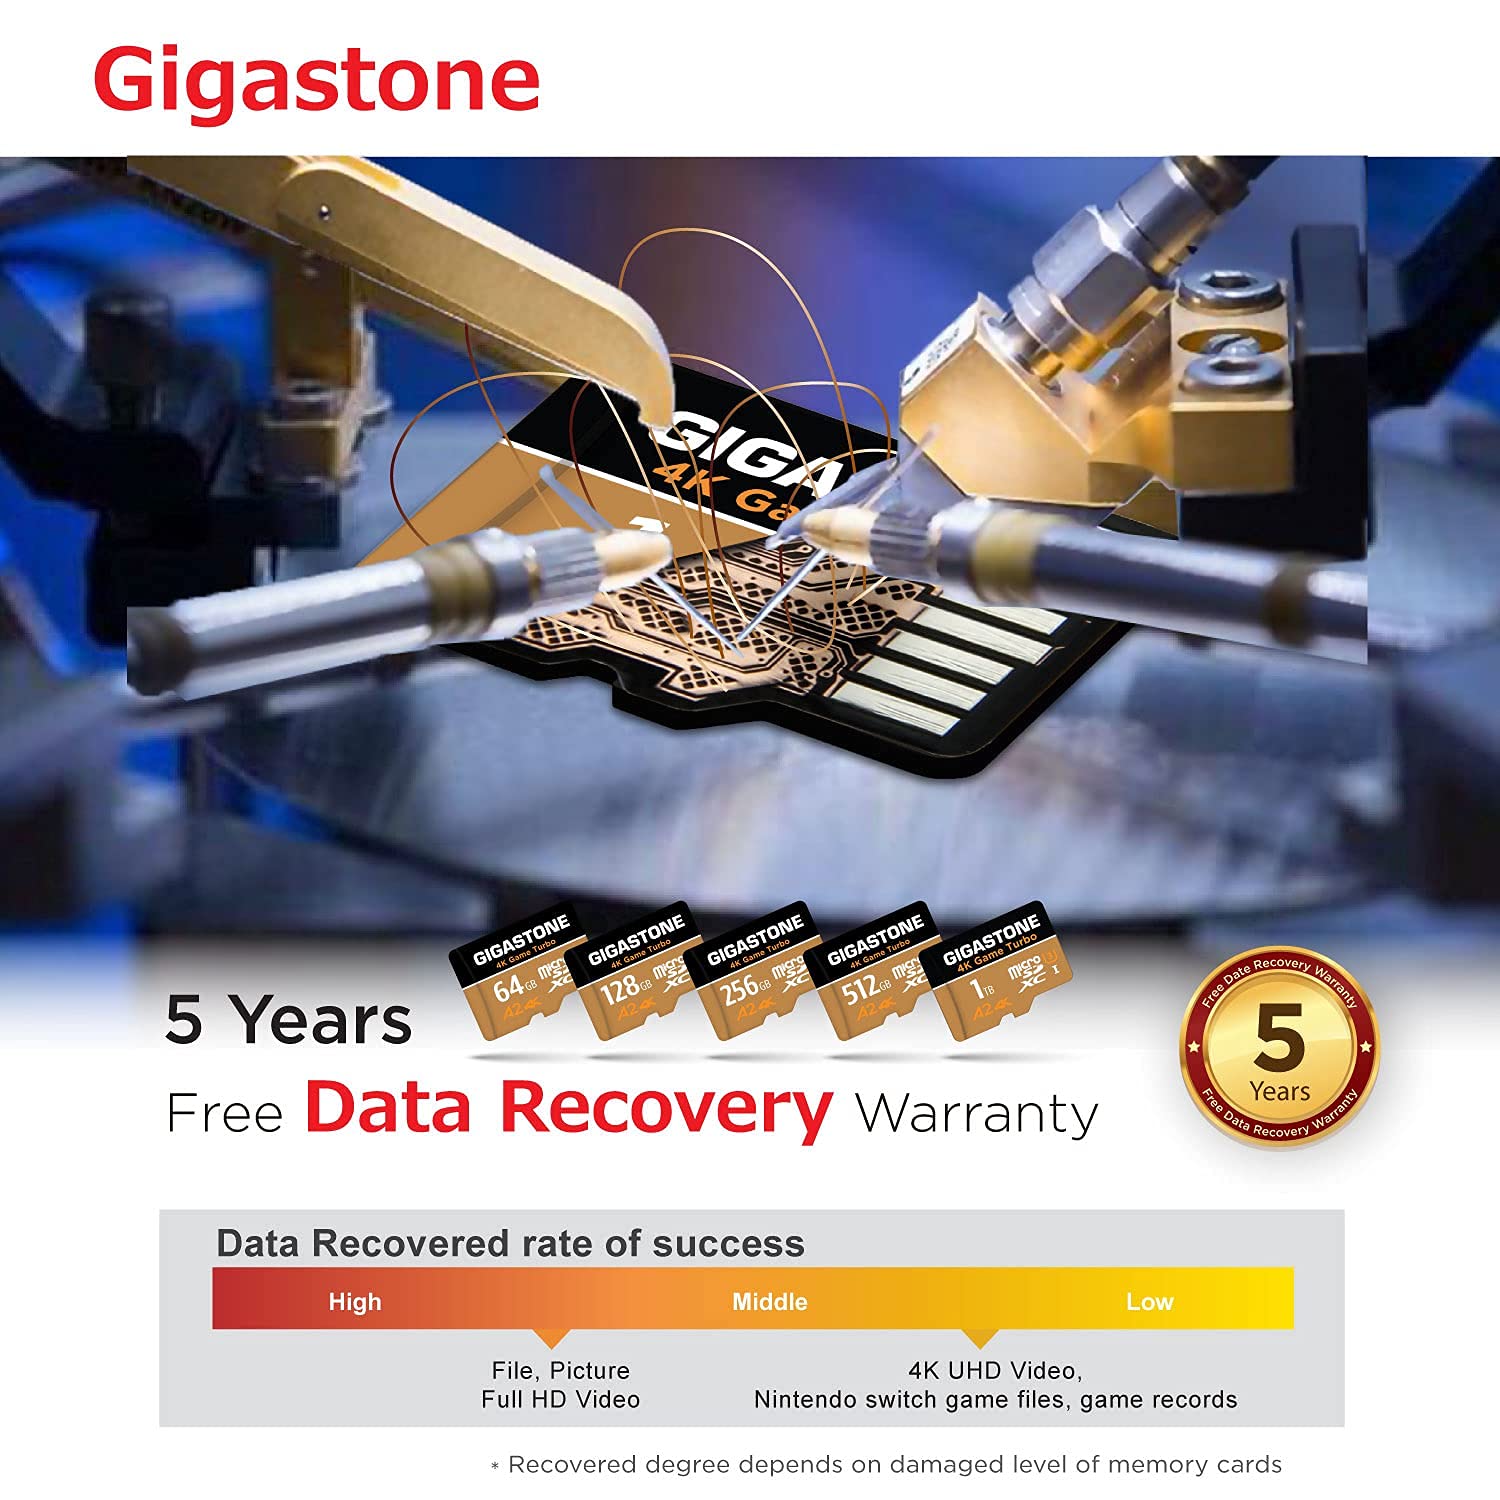 Gigastone 256GB Game Turbo Micro SD Card, UHS-I U3 C10 Class 10 Nintendo Switch Compatible, 4K UHD Video 100MB/s, with [5-yrs Free Data Recovery]